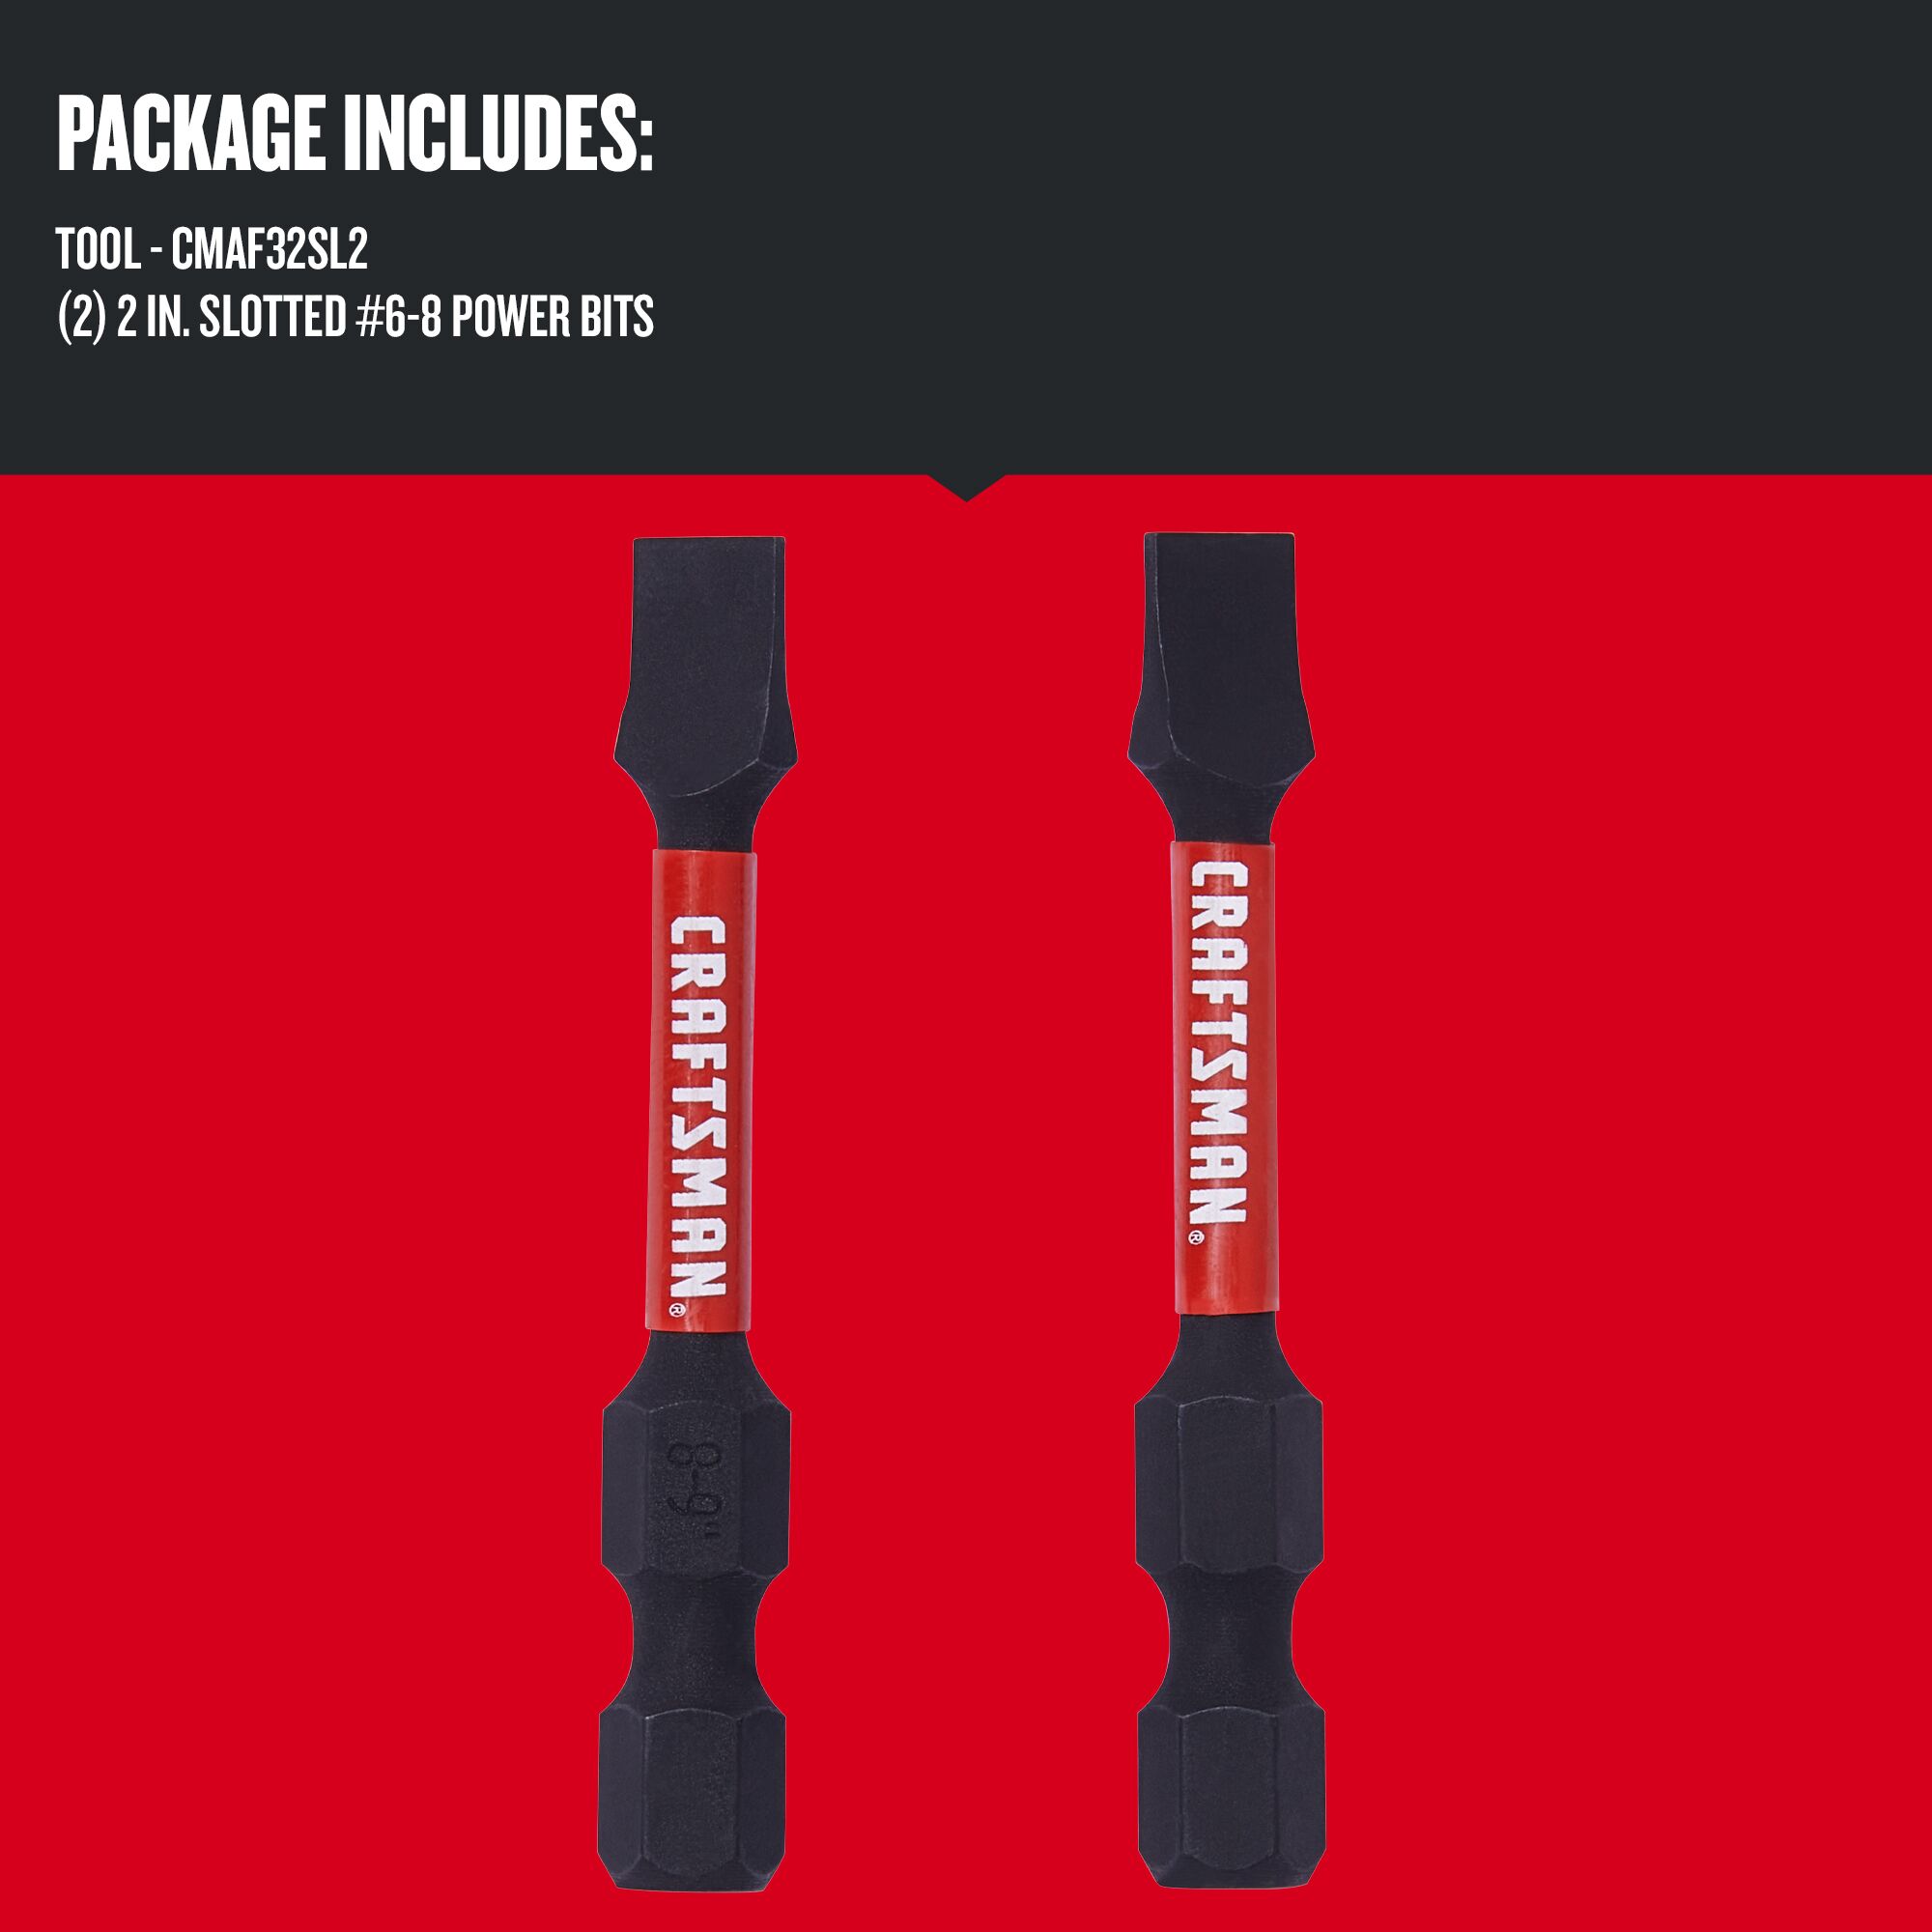 Graphic of CRAFTSMAN Screwdrivers: Bits highlighting product features